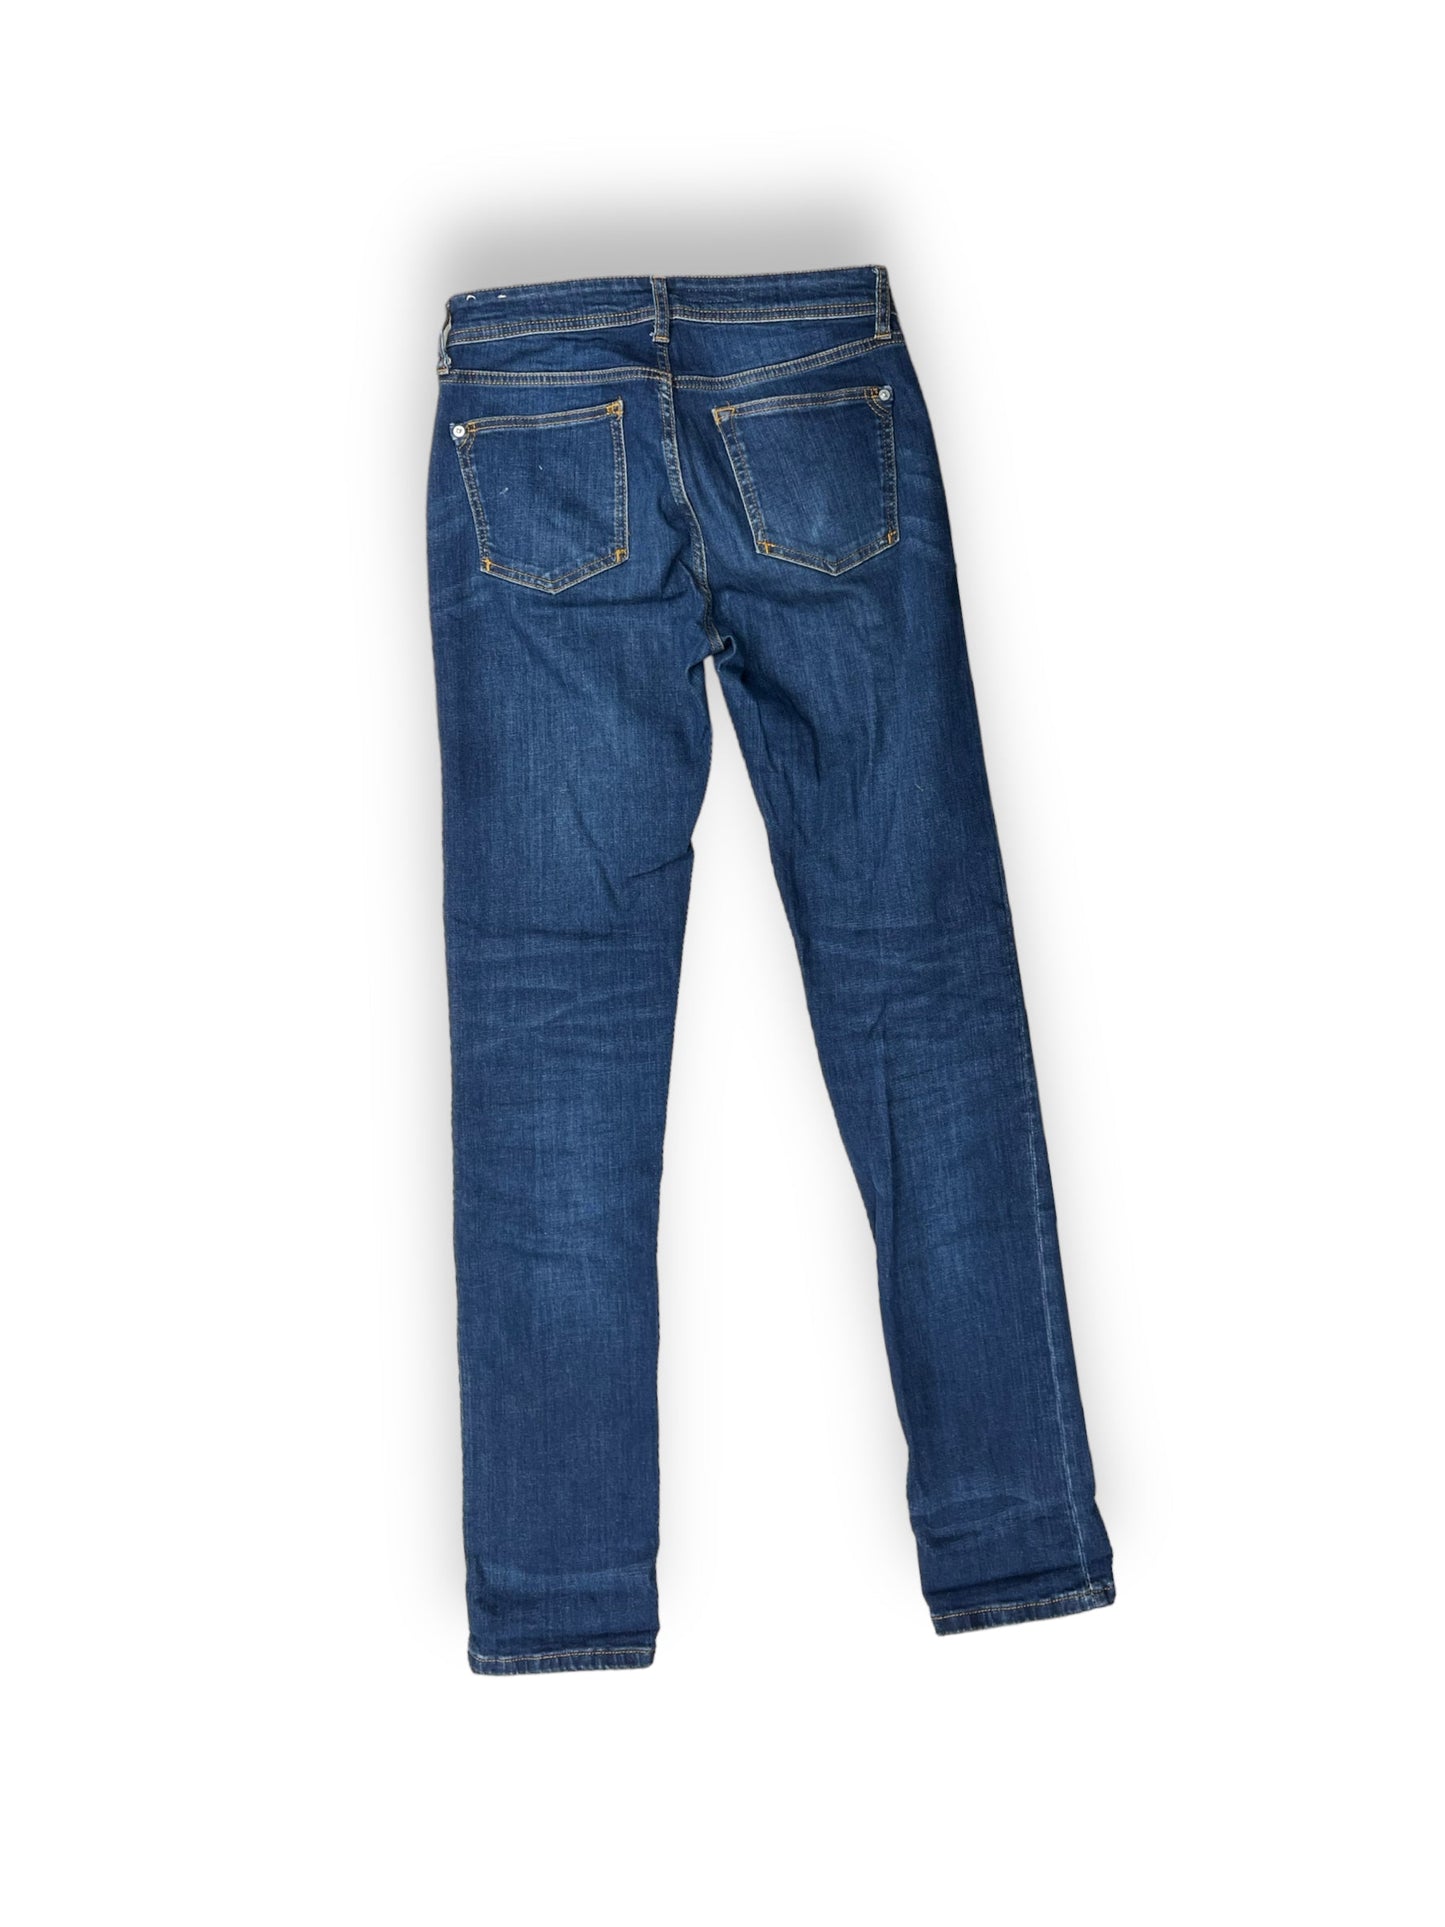 Jeans Skinny By Pilcro  Size: 26